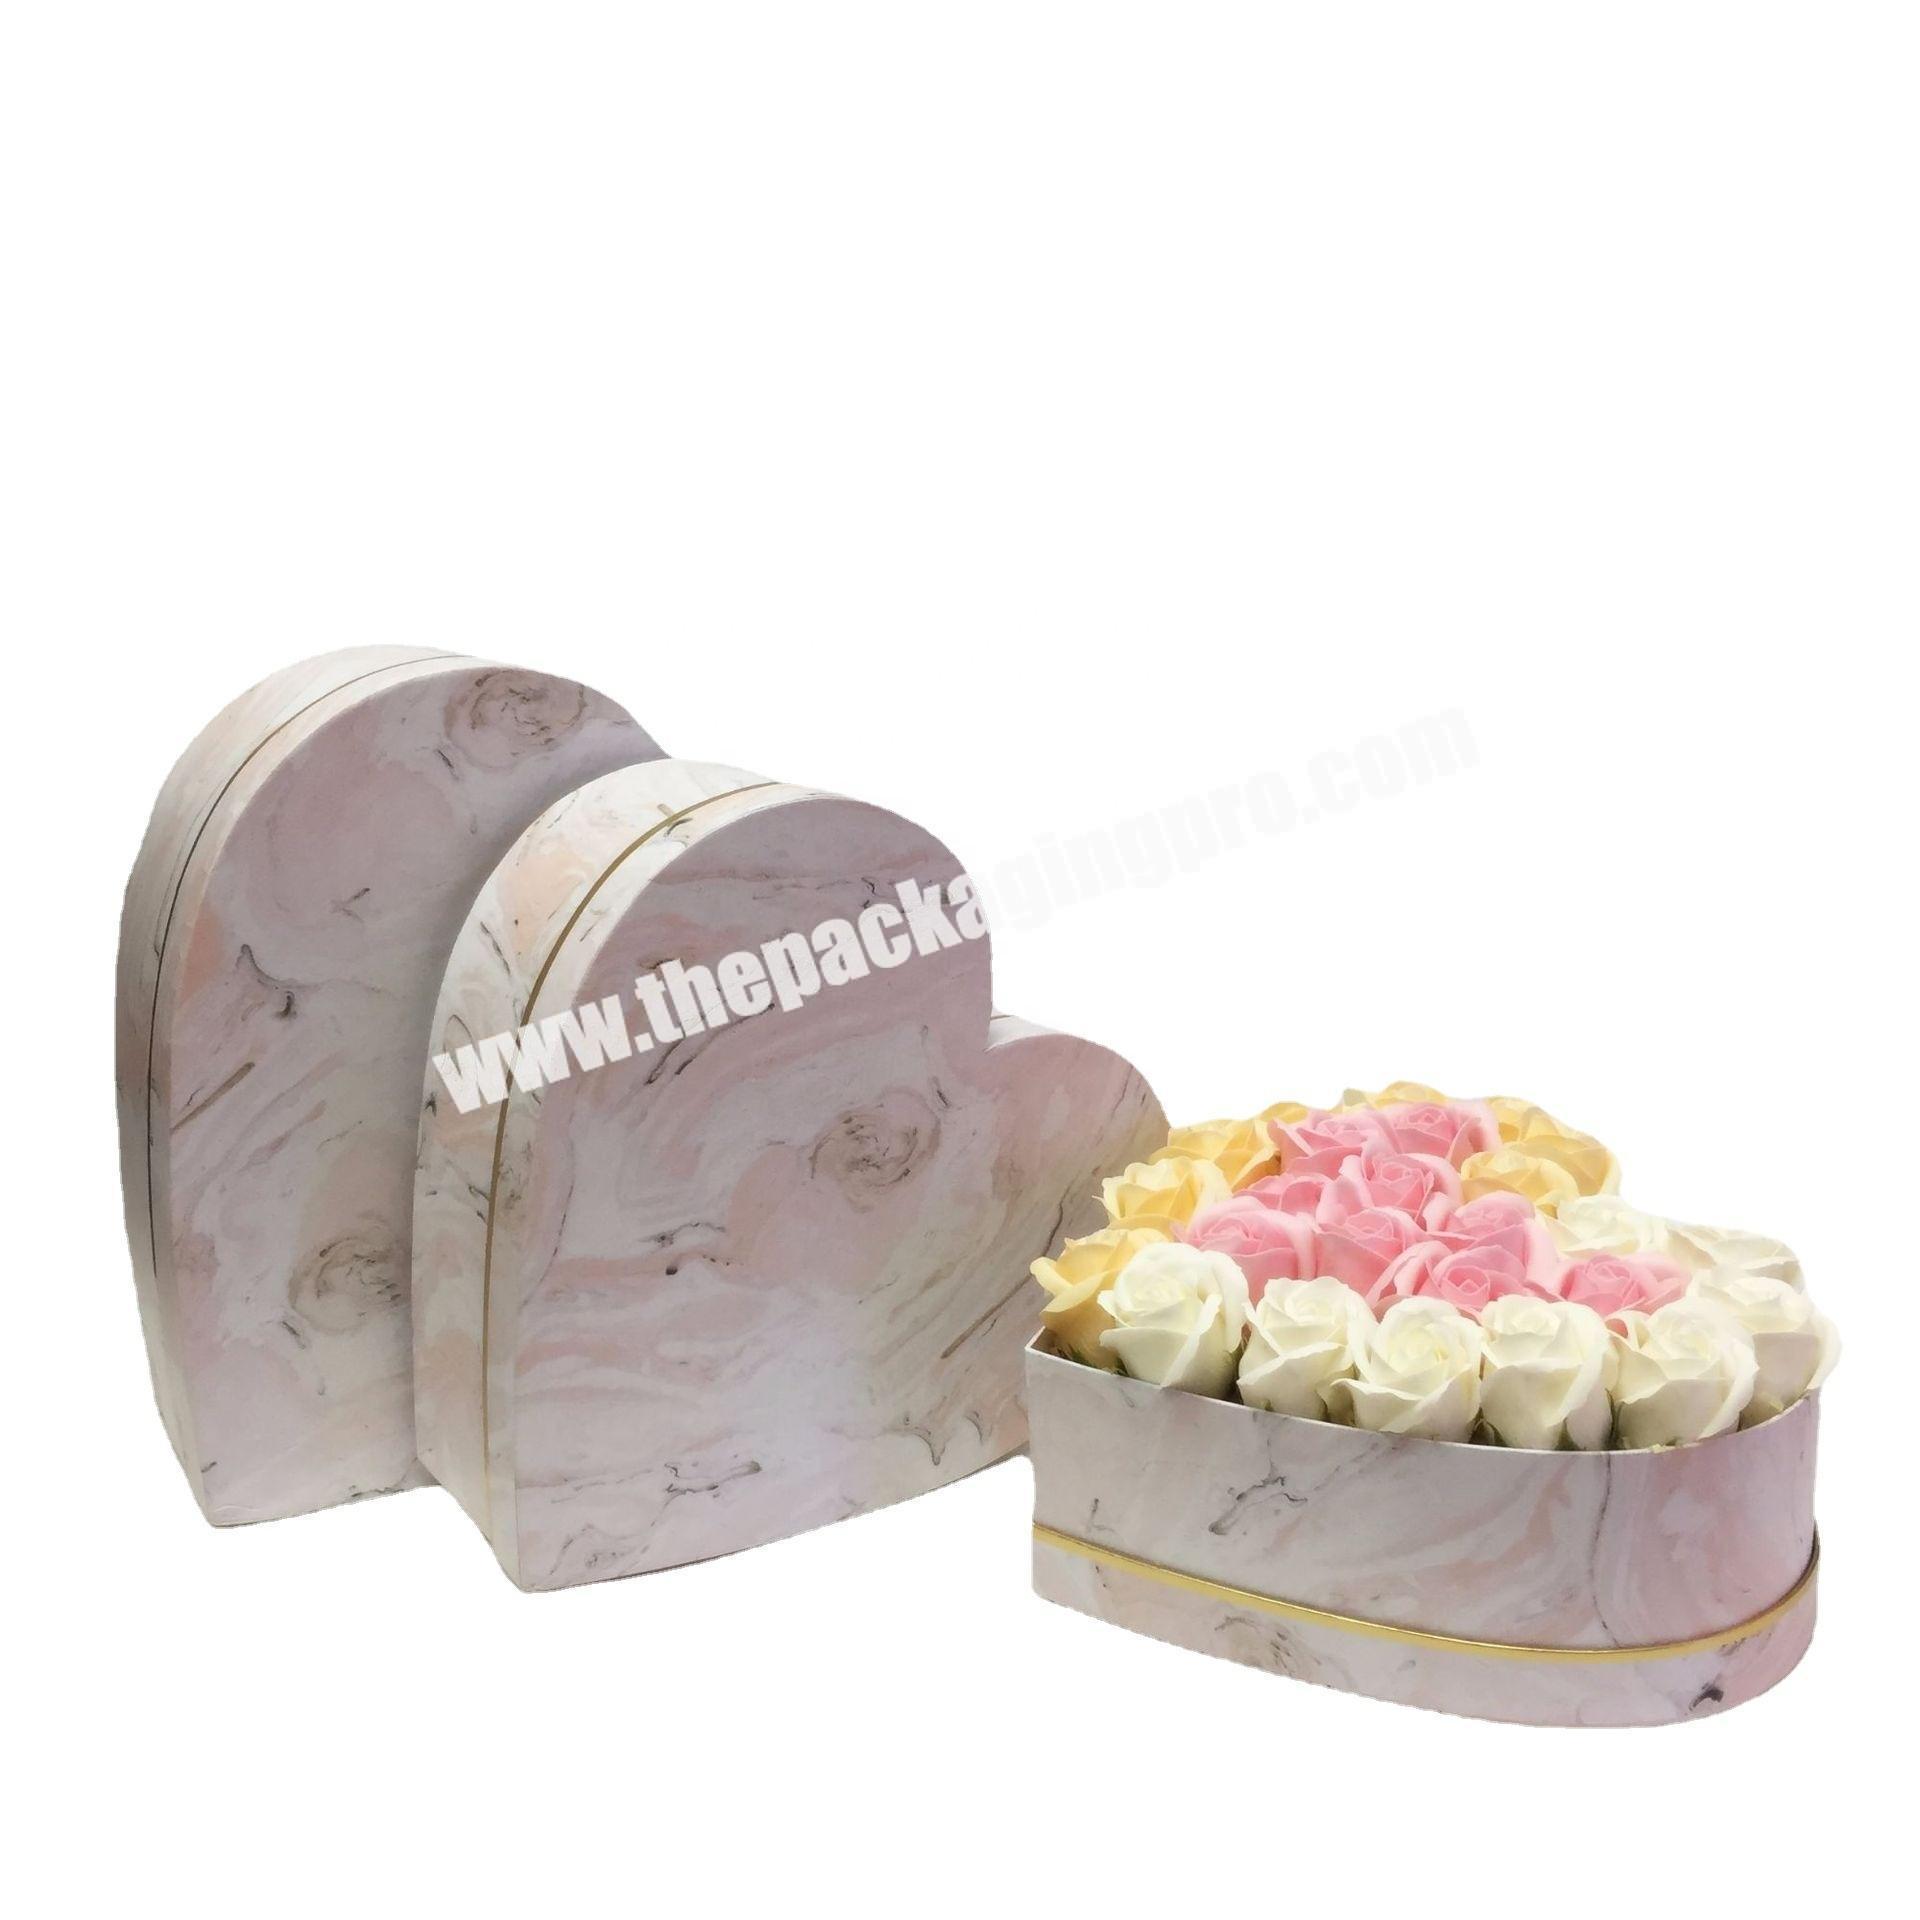 luxury heart shape container gift box empty heart packaging boxes romantic heart shaped box with lids